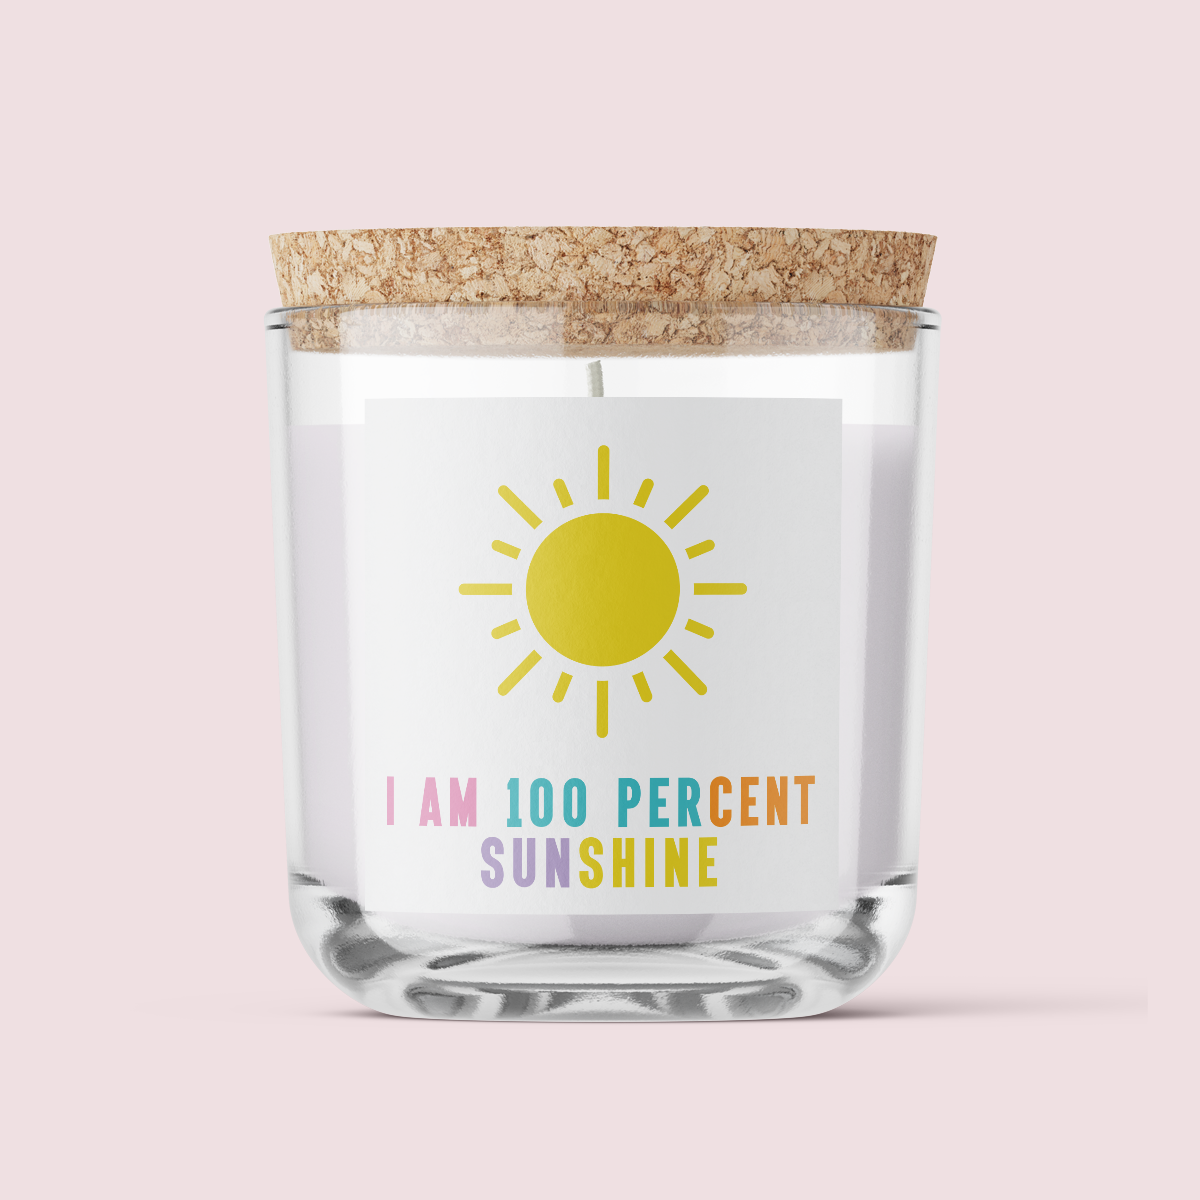 She Believed She Could Collection - I am 100 percent sunshine - SQUARE